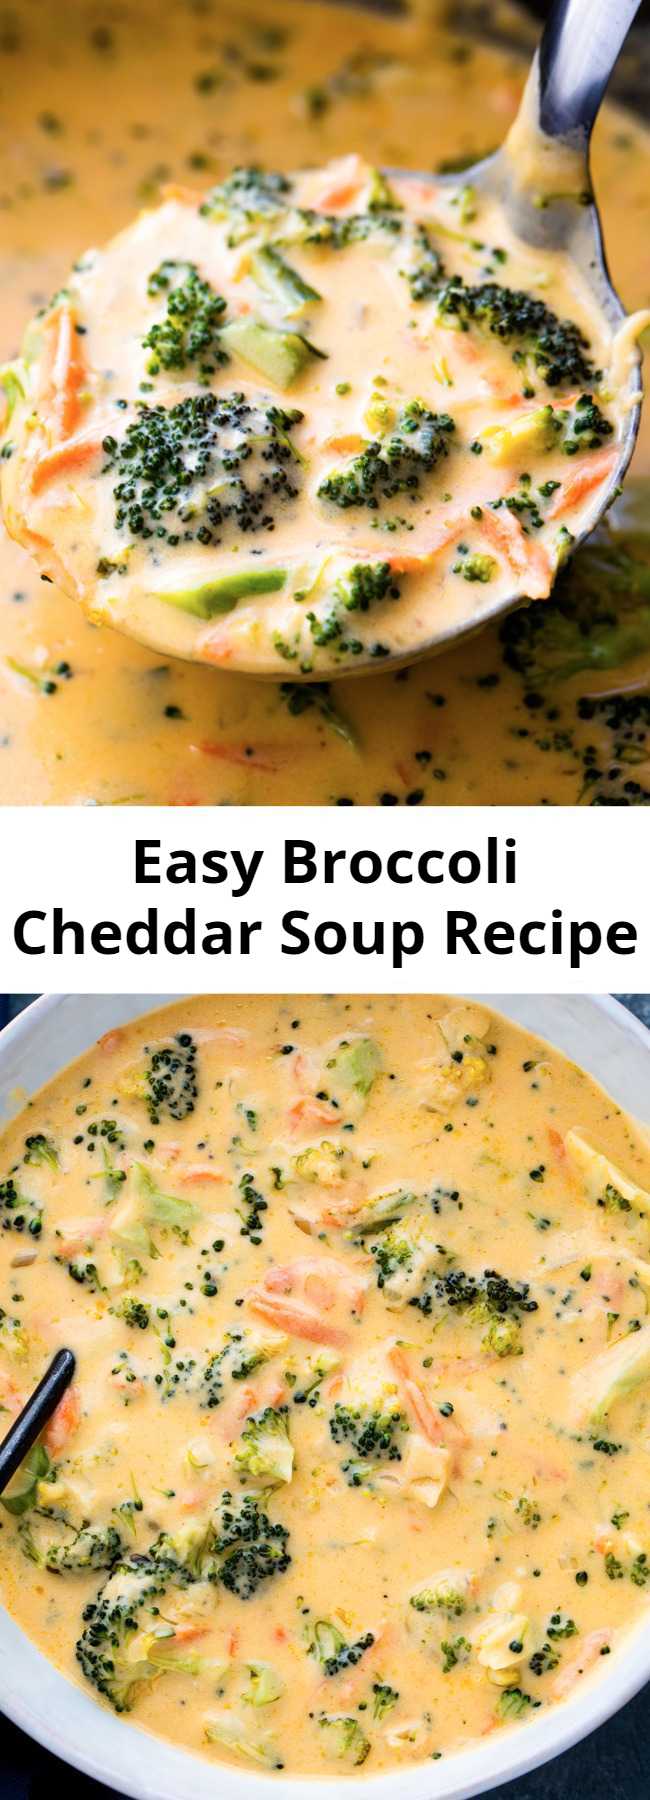 Easy Broccoli Cheddar Soup Recipe - Healthy broccoli cheddar soup packed with carrots, broccoli, garlic, and cheese. This creamy velvety soup is much better than Panera's broccoli cheddar soup and can be made in under 30 minutes for a fraction of the price!